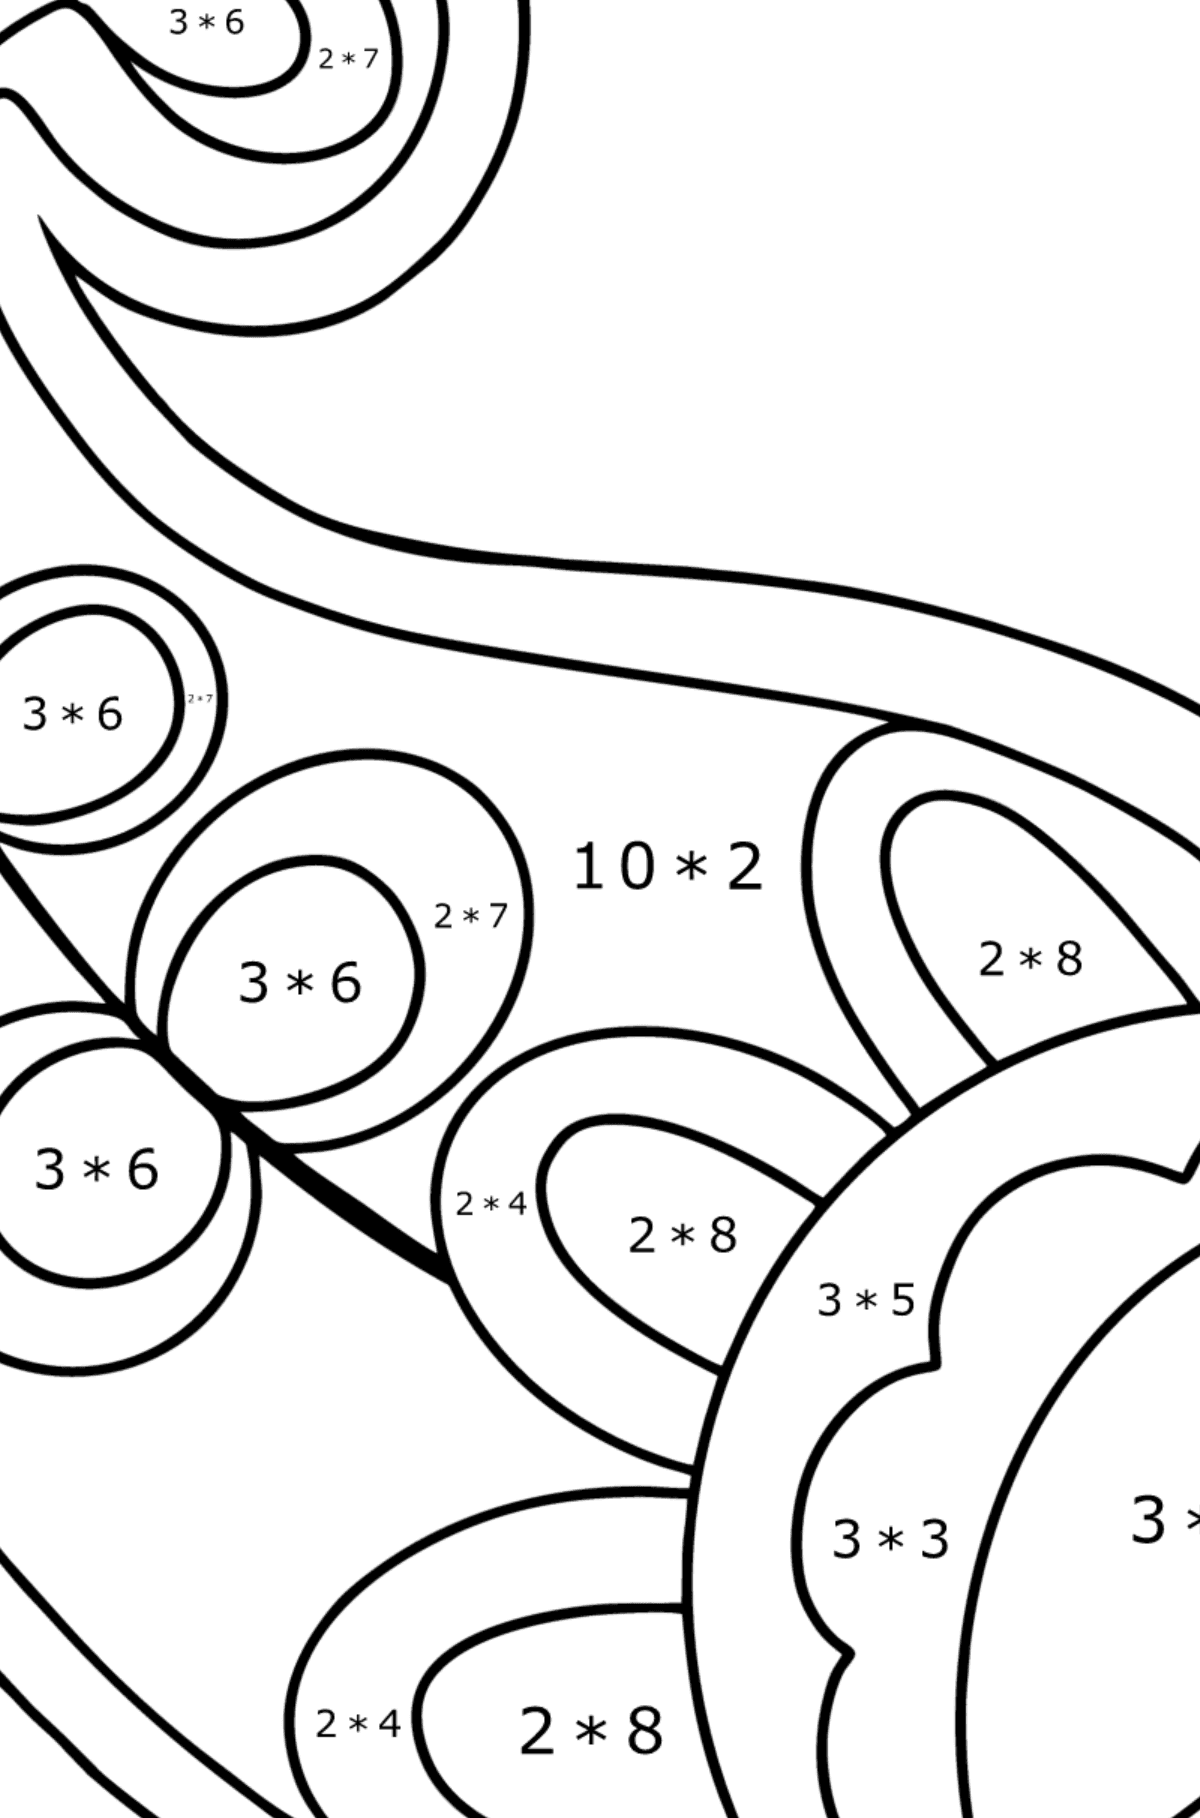 Paisley coloring page for Kids - Math Coloring - Multiplication for Kids